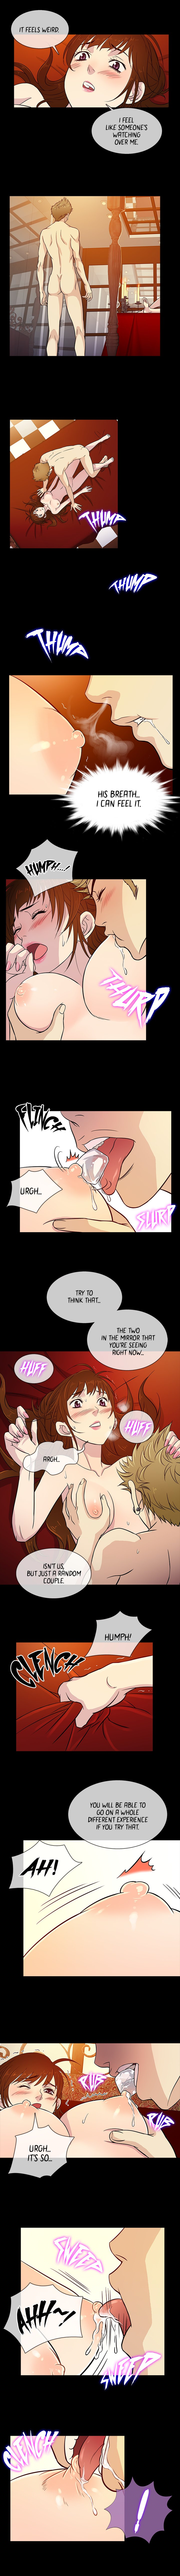 She’s Back - Chapter 16 Page 5